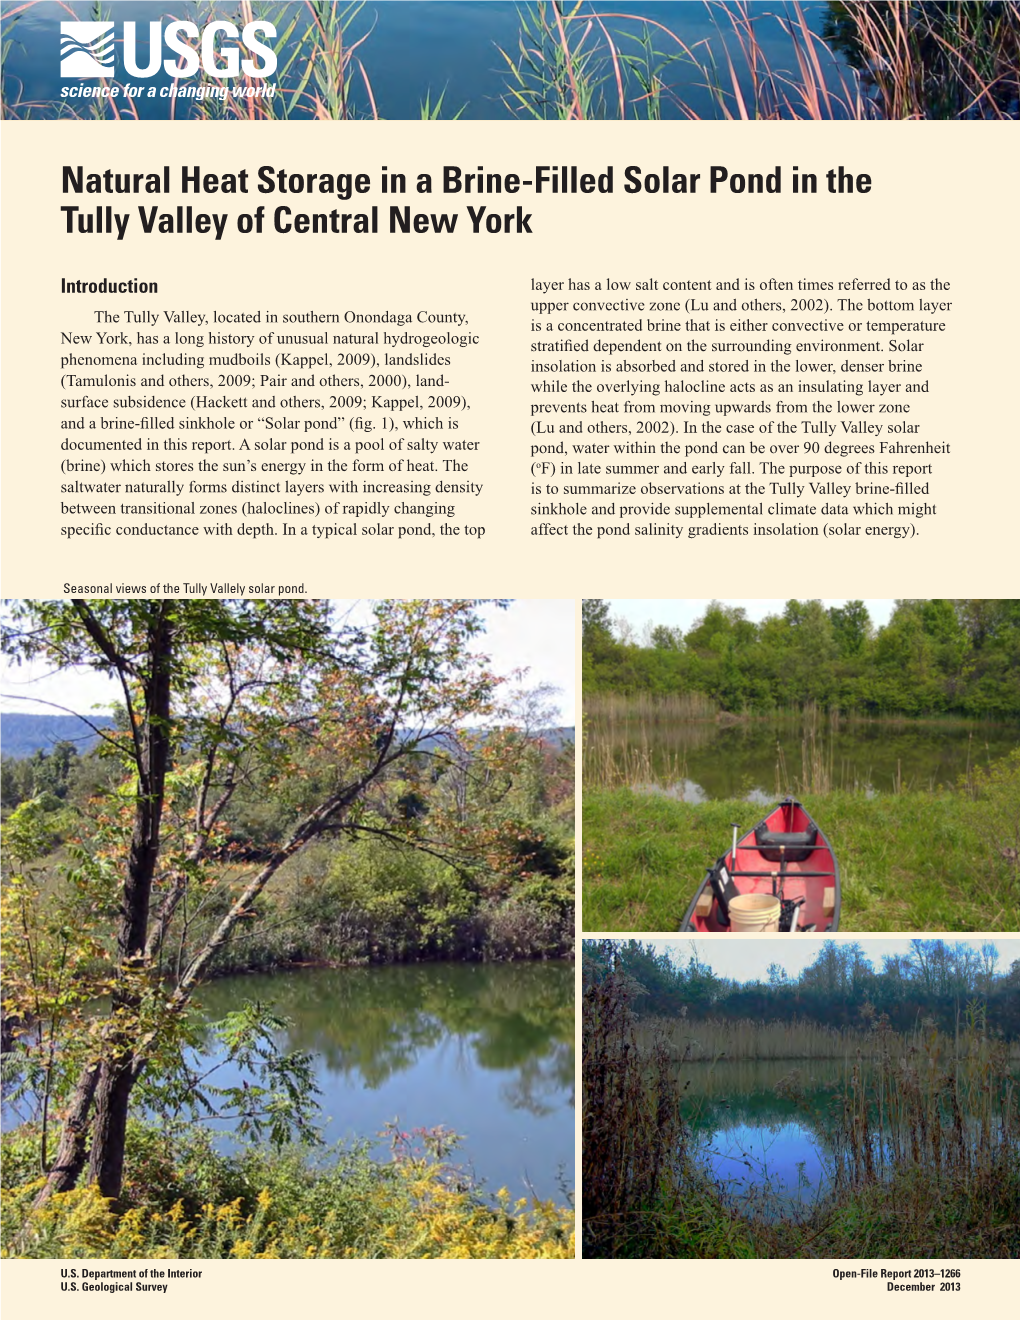 Natural Heat Storage in a Brine-Filled Solar Pond in the Tully Valley of Central New York